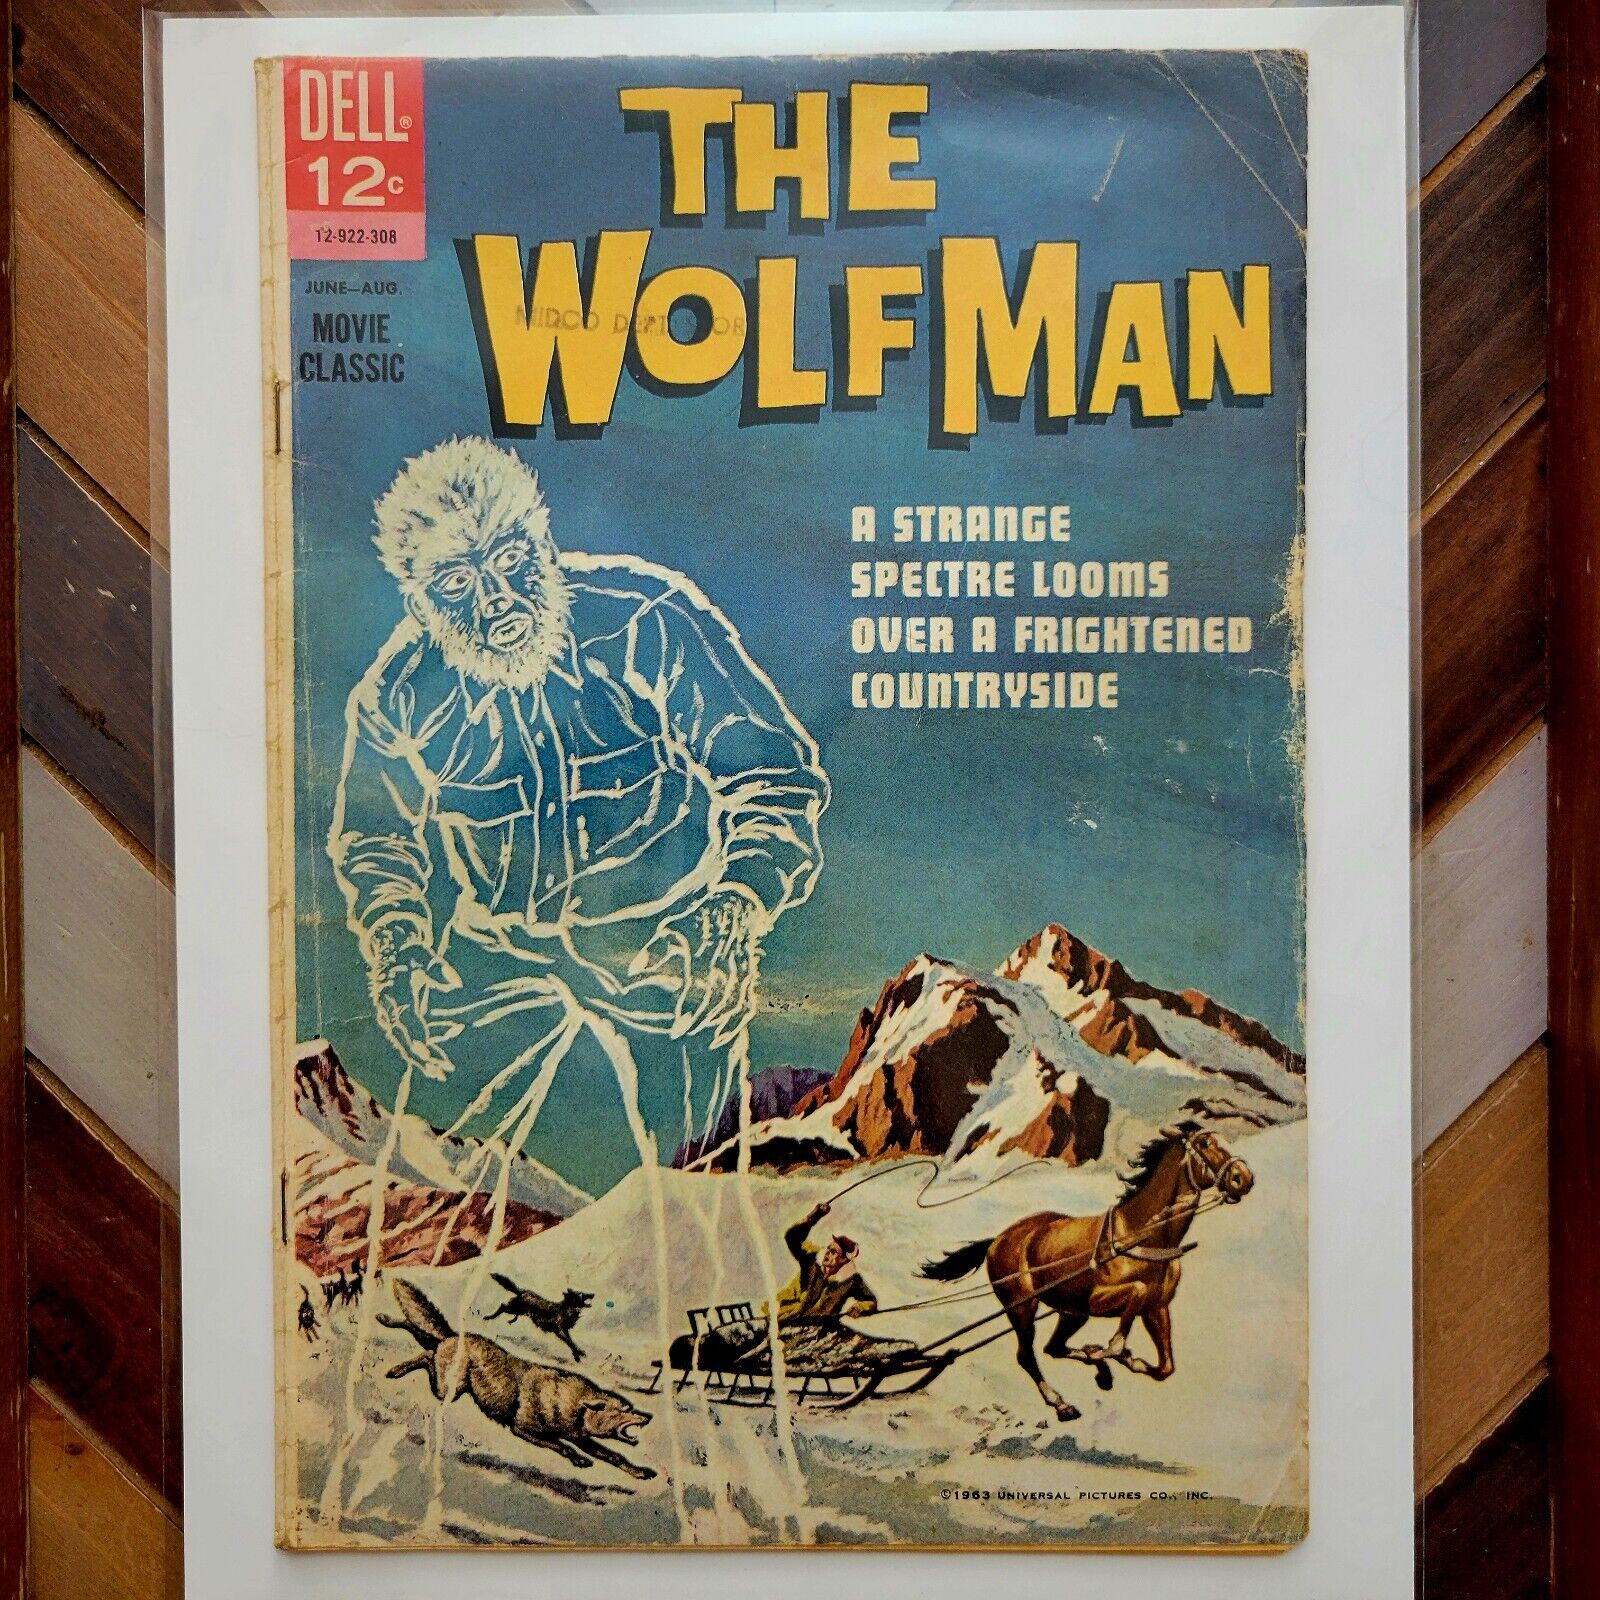 THE WOLFMAN #1 (DELL 1963) Series Premiere FIRST PRINT Silver Age MOVIE CLASSIC